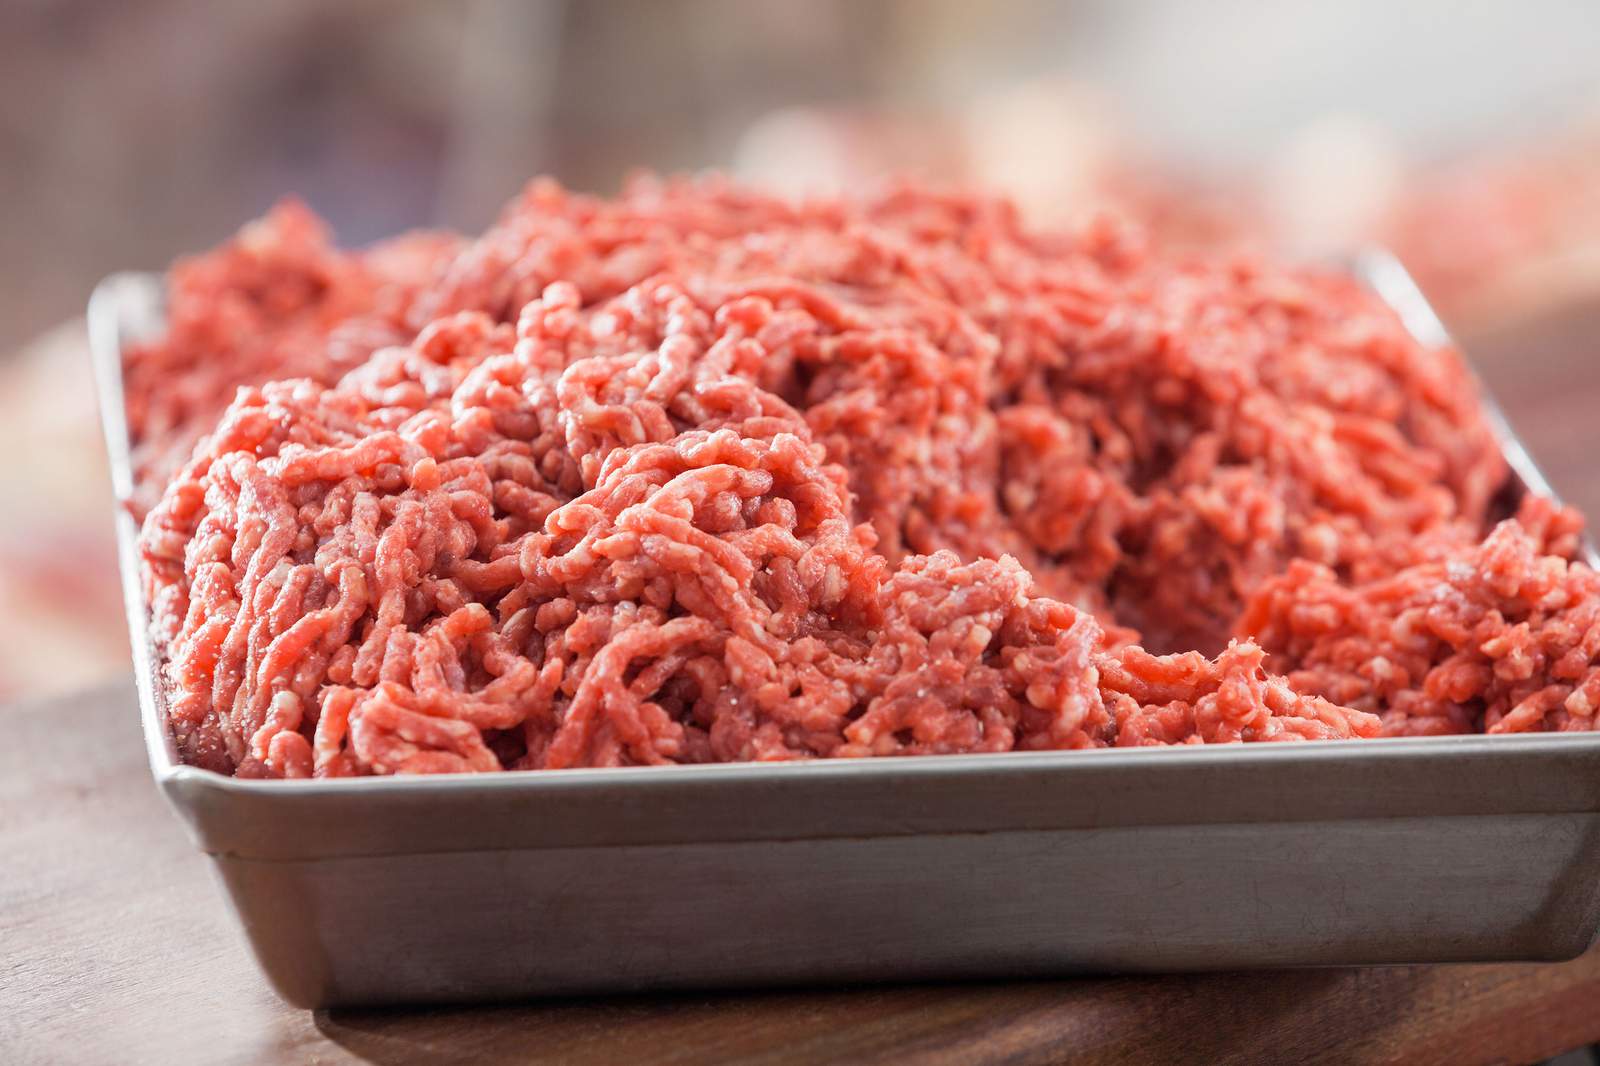 43,000 pounds of ground beef products recalled for possible E. coli contamination